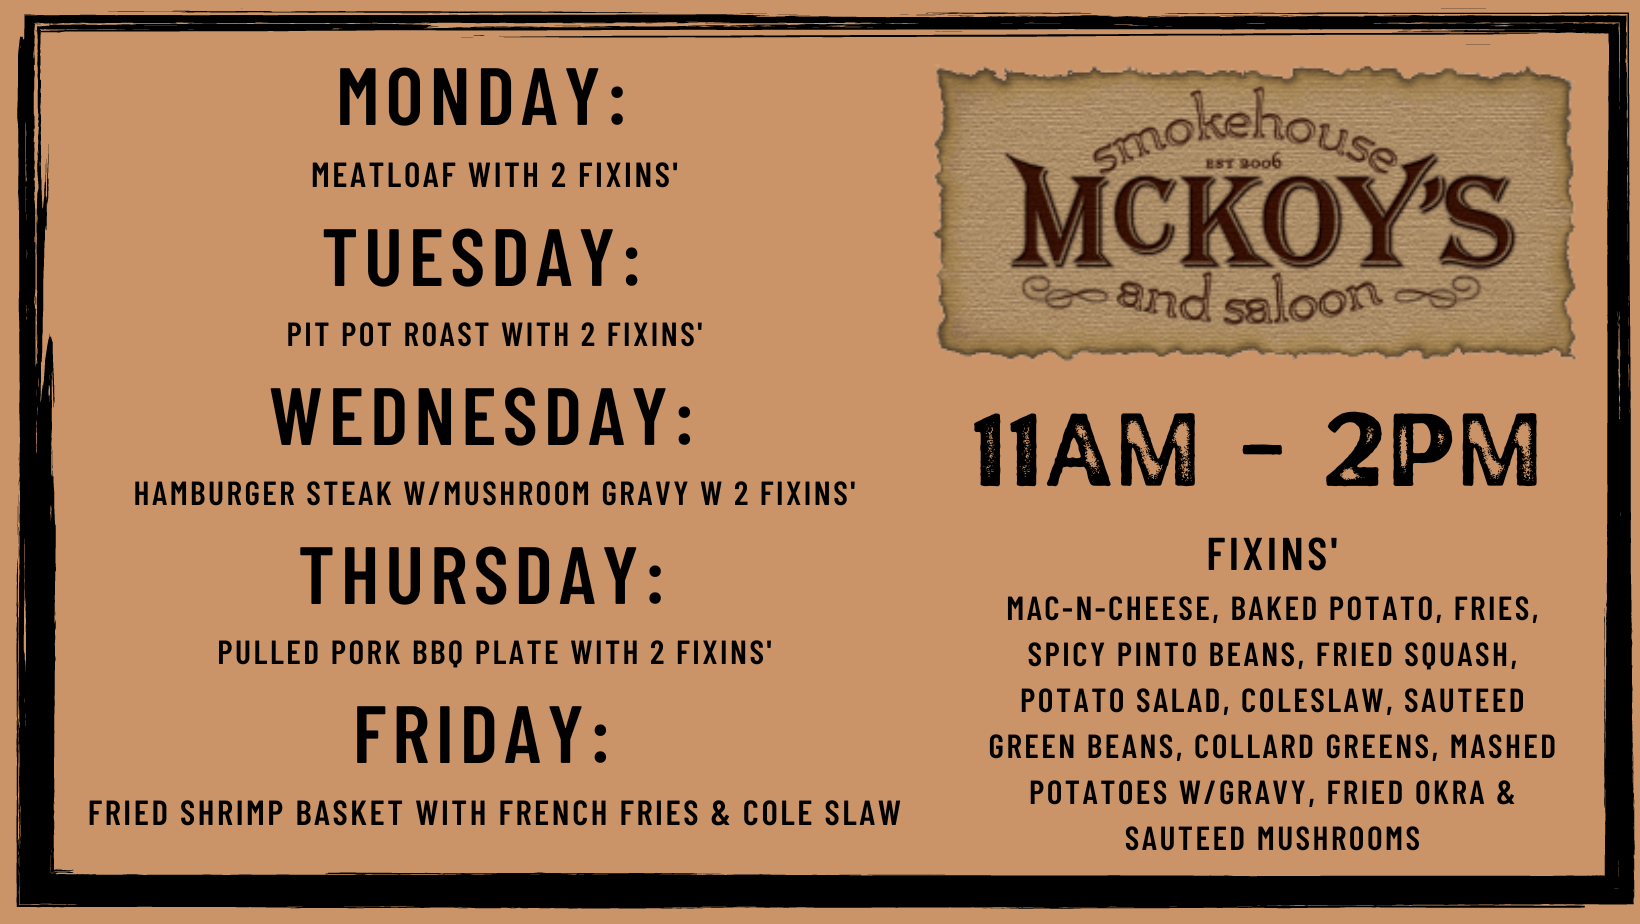 An ad for McKoy's giving daily specials and fixins'.